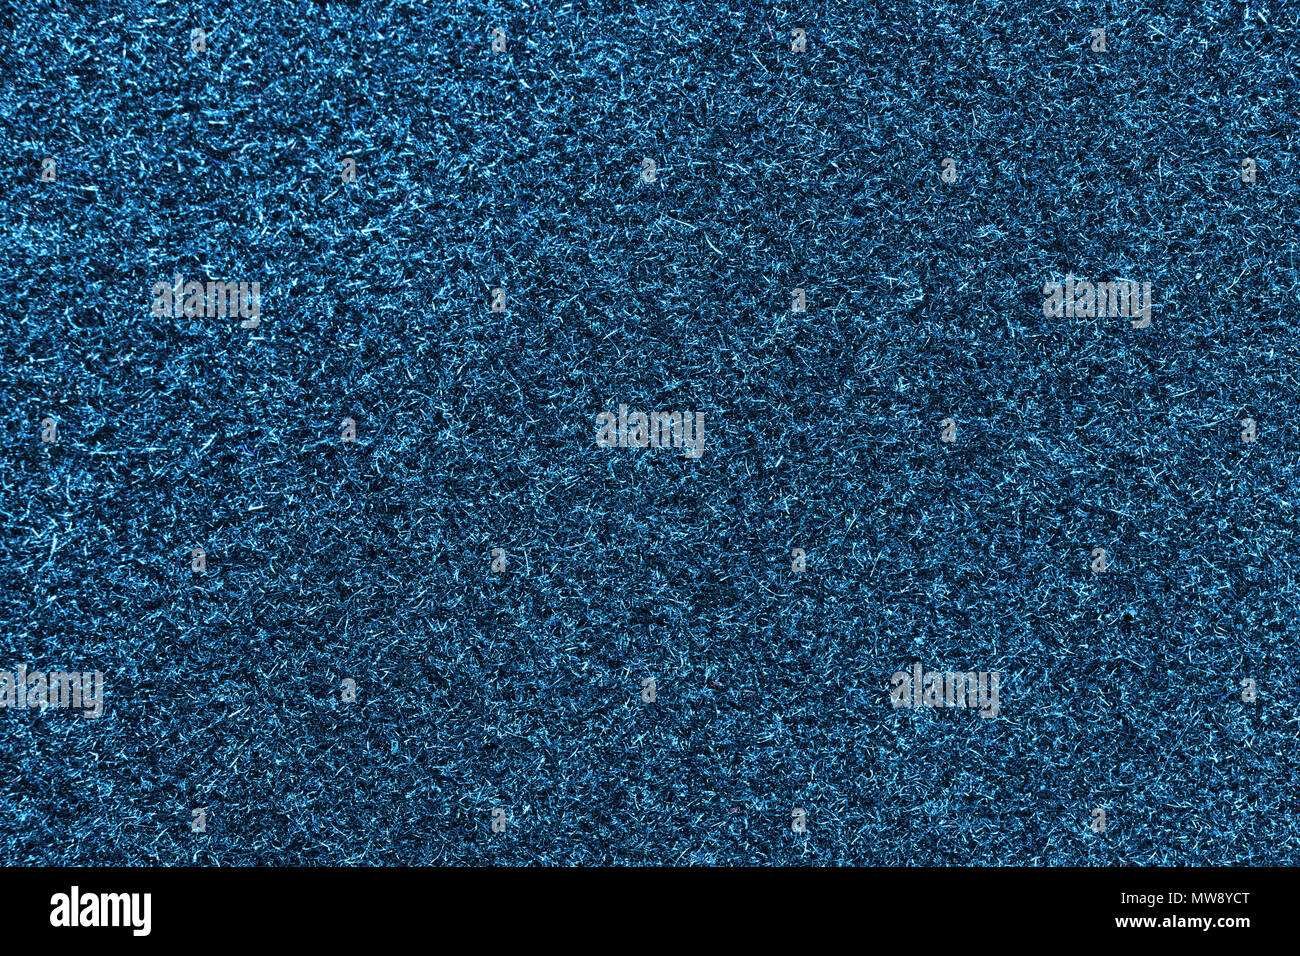 Blue Fleecy Material Texture. Detailed Fibers Fluffy Surface Background. Stock Photo